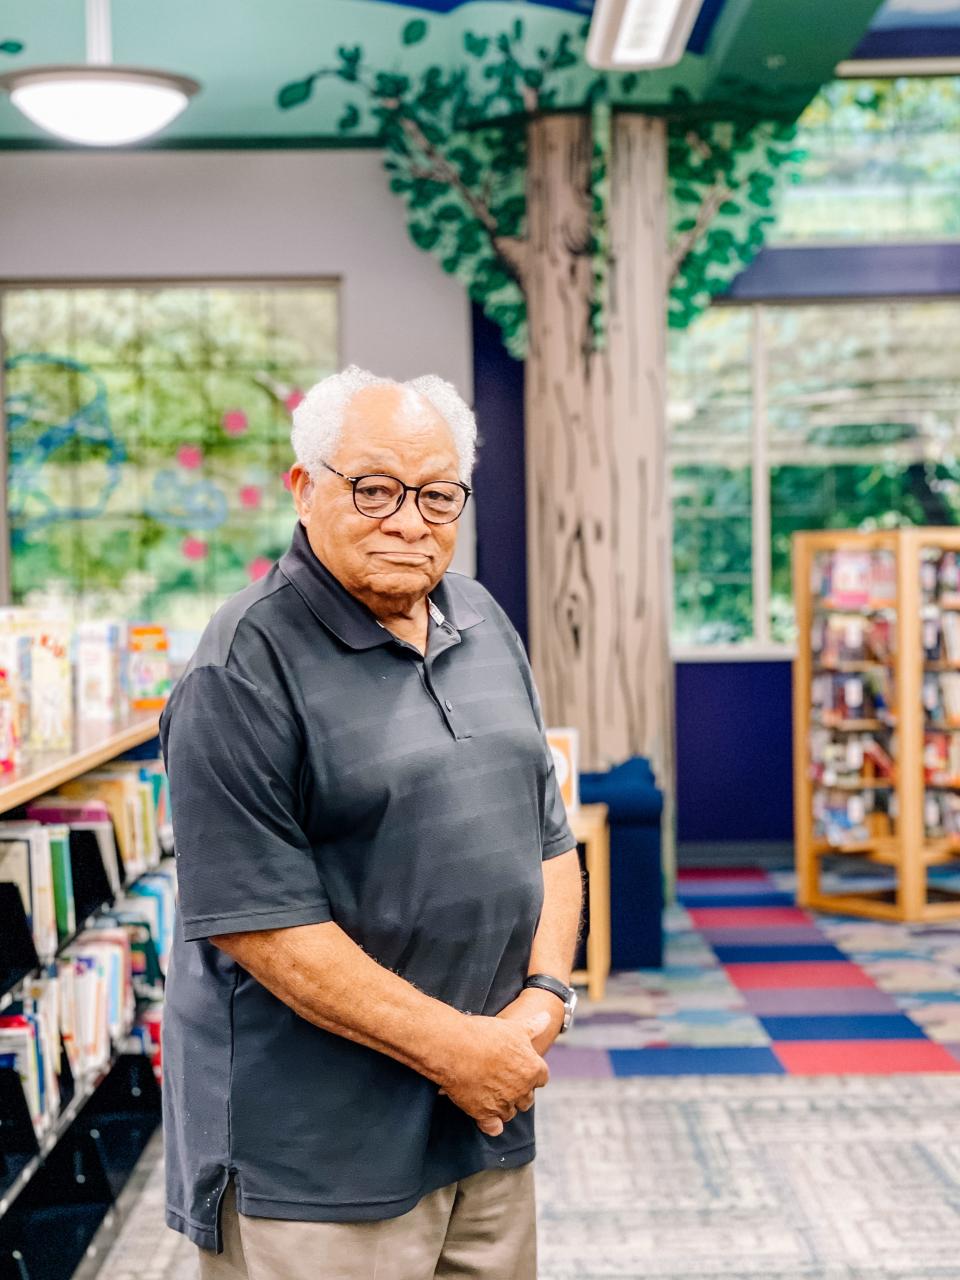 “I guess none of this job has been bad for me,” said Willard Laster, who has worked for Knox County libraries for 60 years. “The bookmobile was probably the fun part of it. I had a very nice supervisor, Maxine. When you are with someone for eight hours a day you become really close.” Fountain City Branch Library, July 6, 2022.